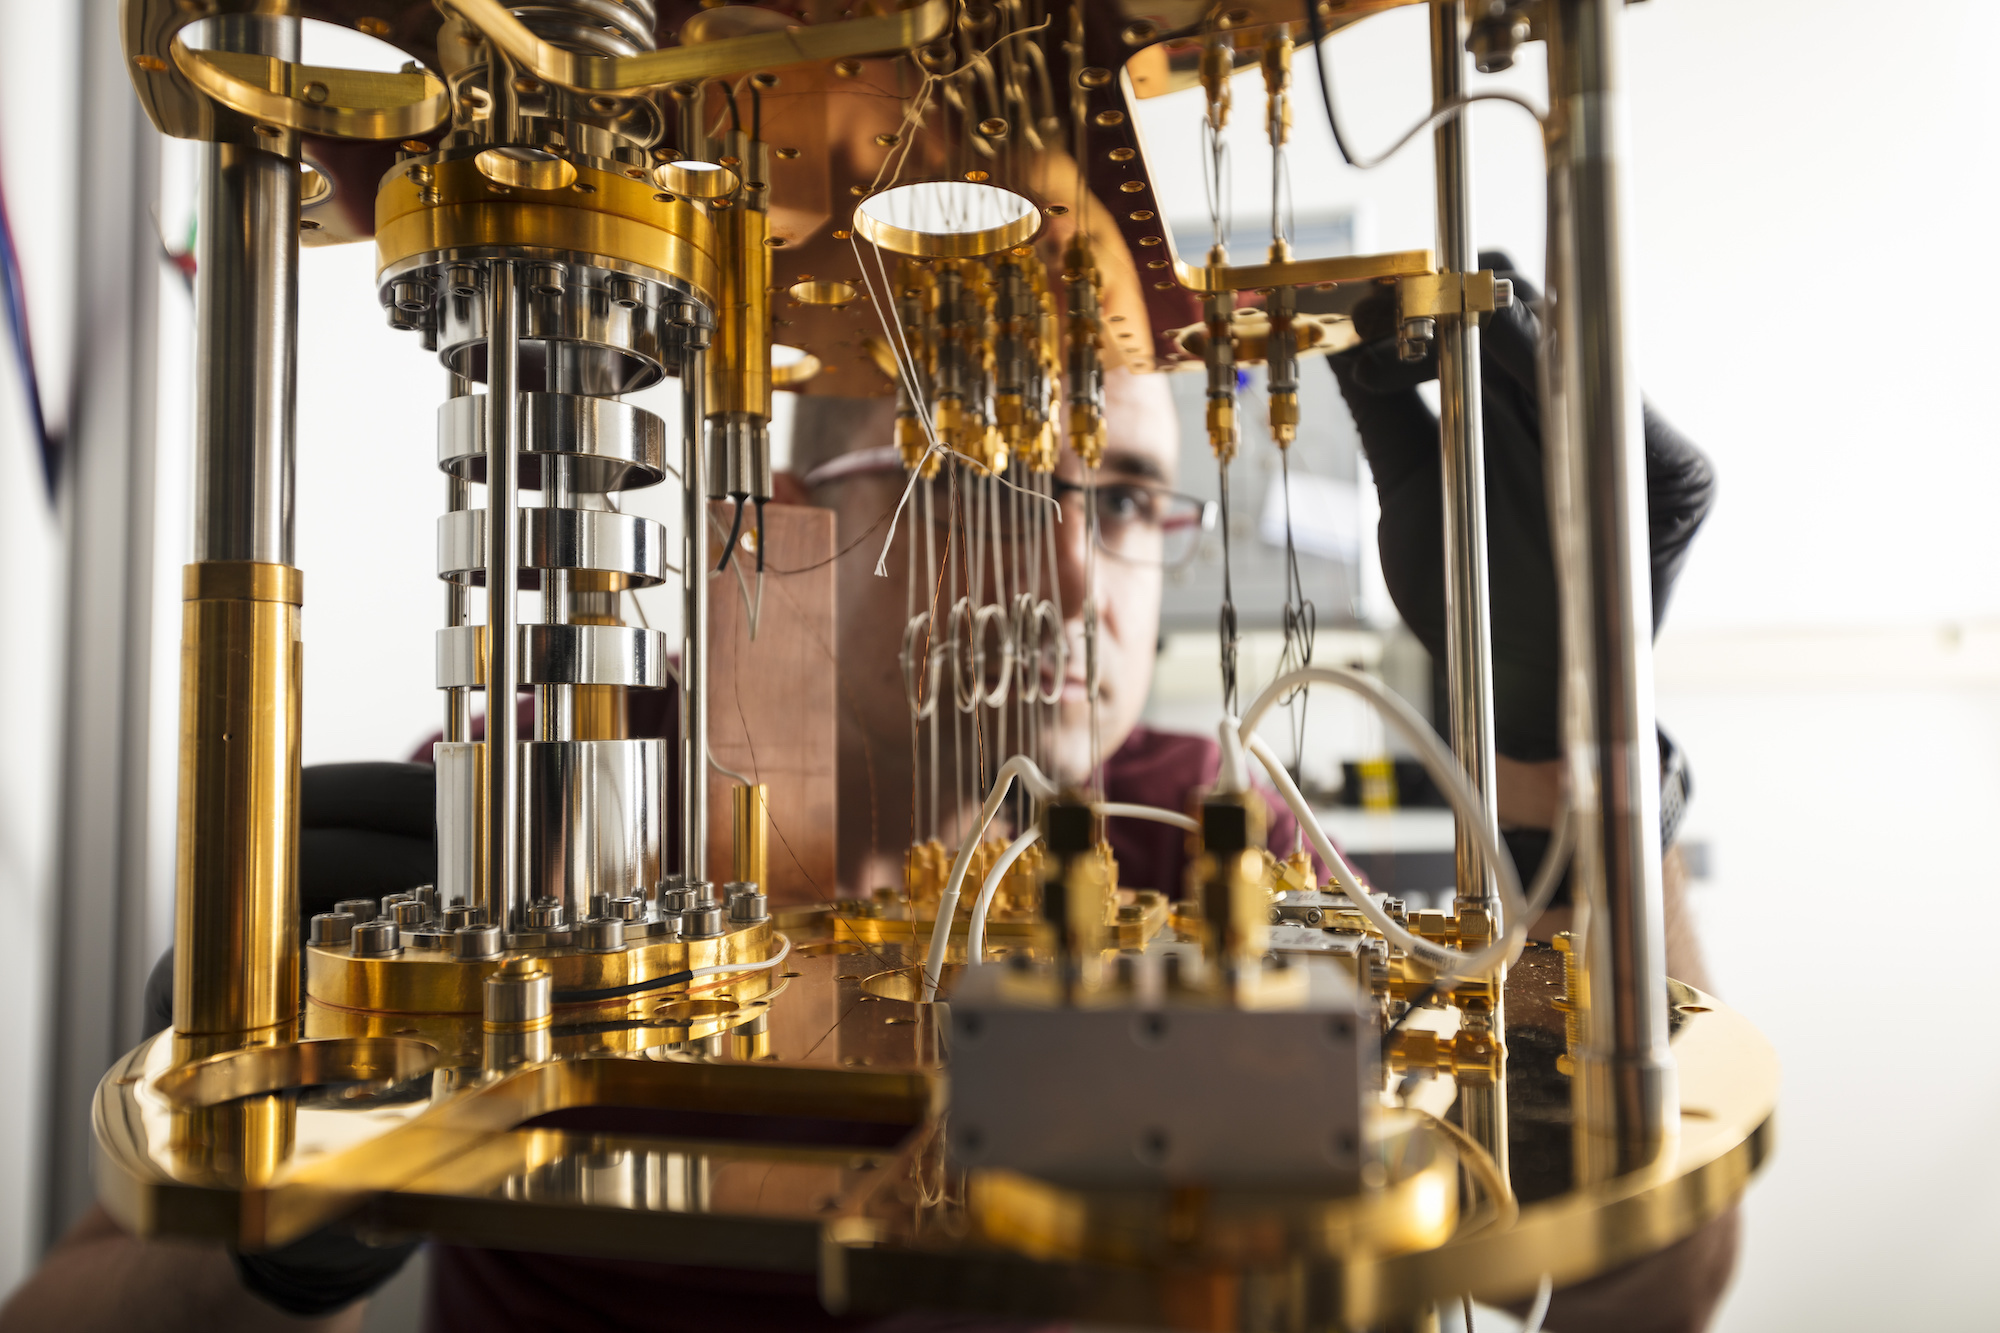 APL’s low-temperature test bed lab is an experimental facility for quantum computing simulations.